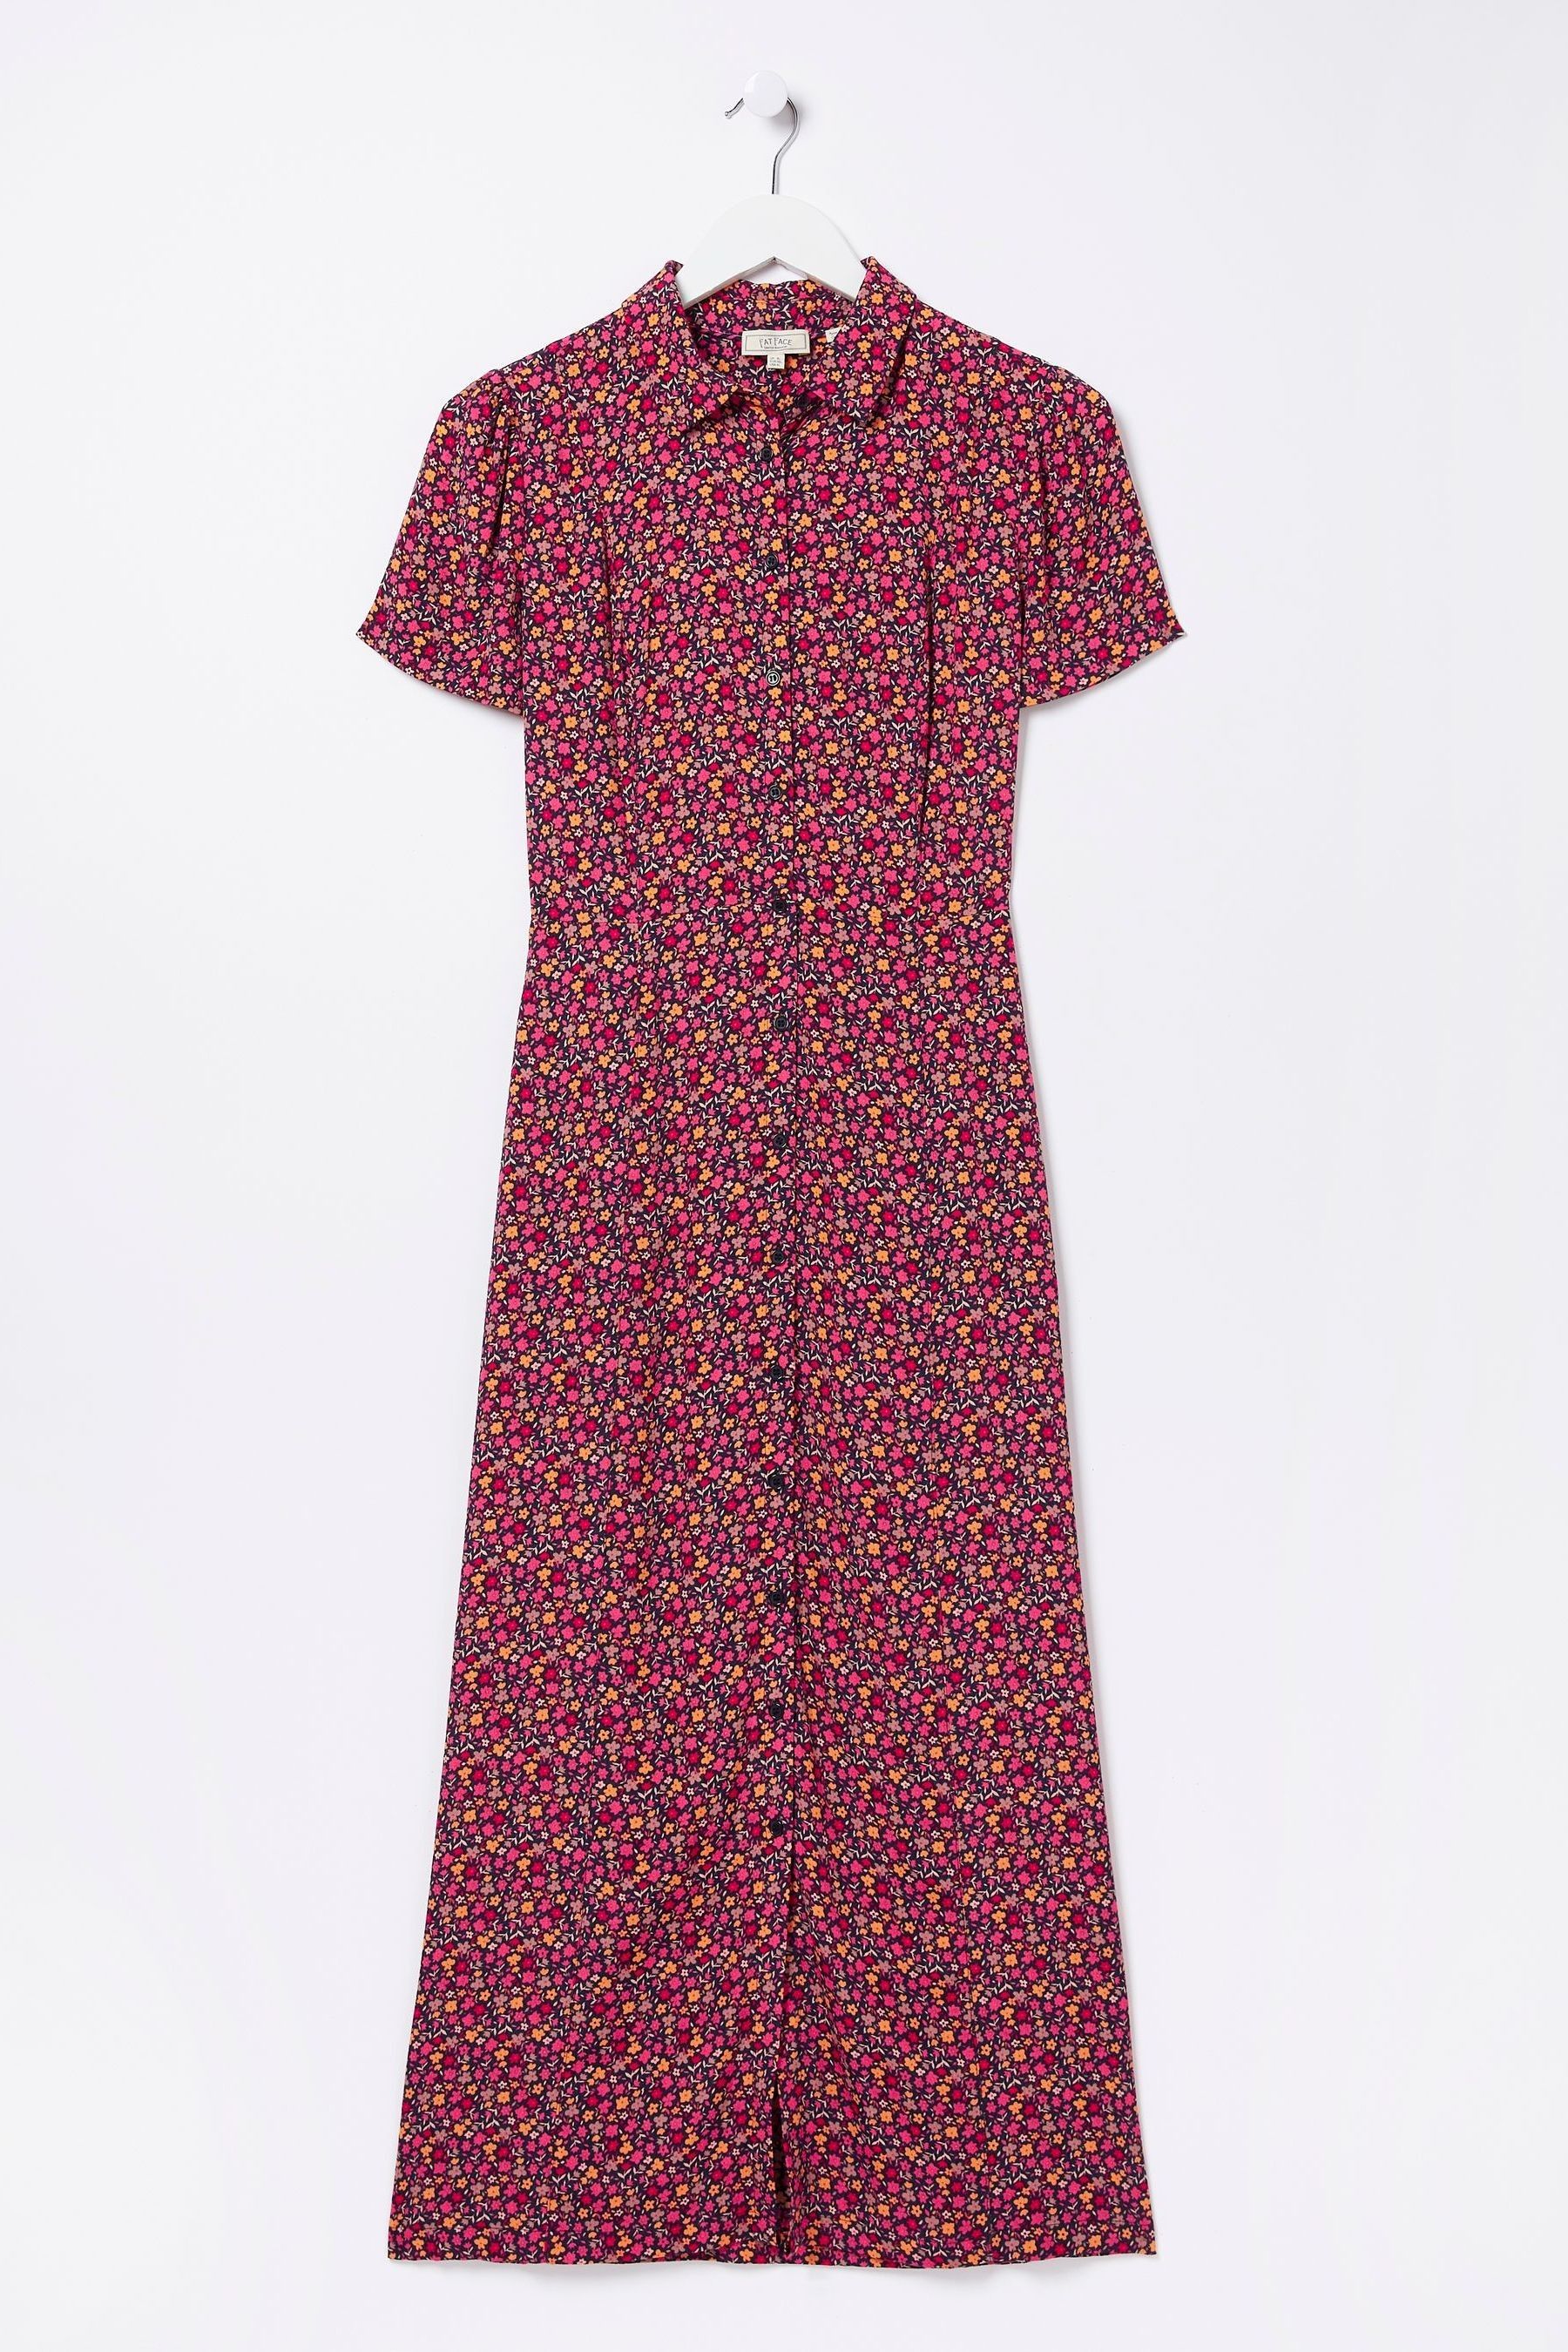 Buy FatFace Aster Ditsy Midi Shirt Dress from the Next UK online shop